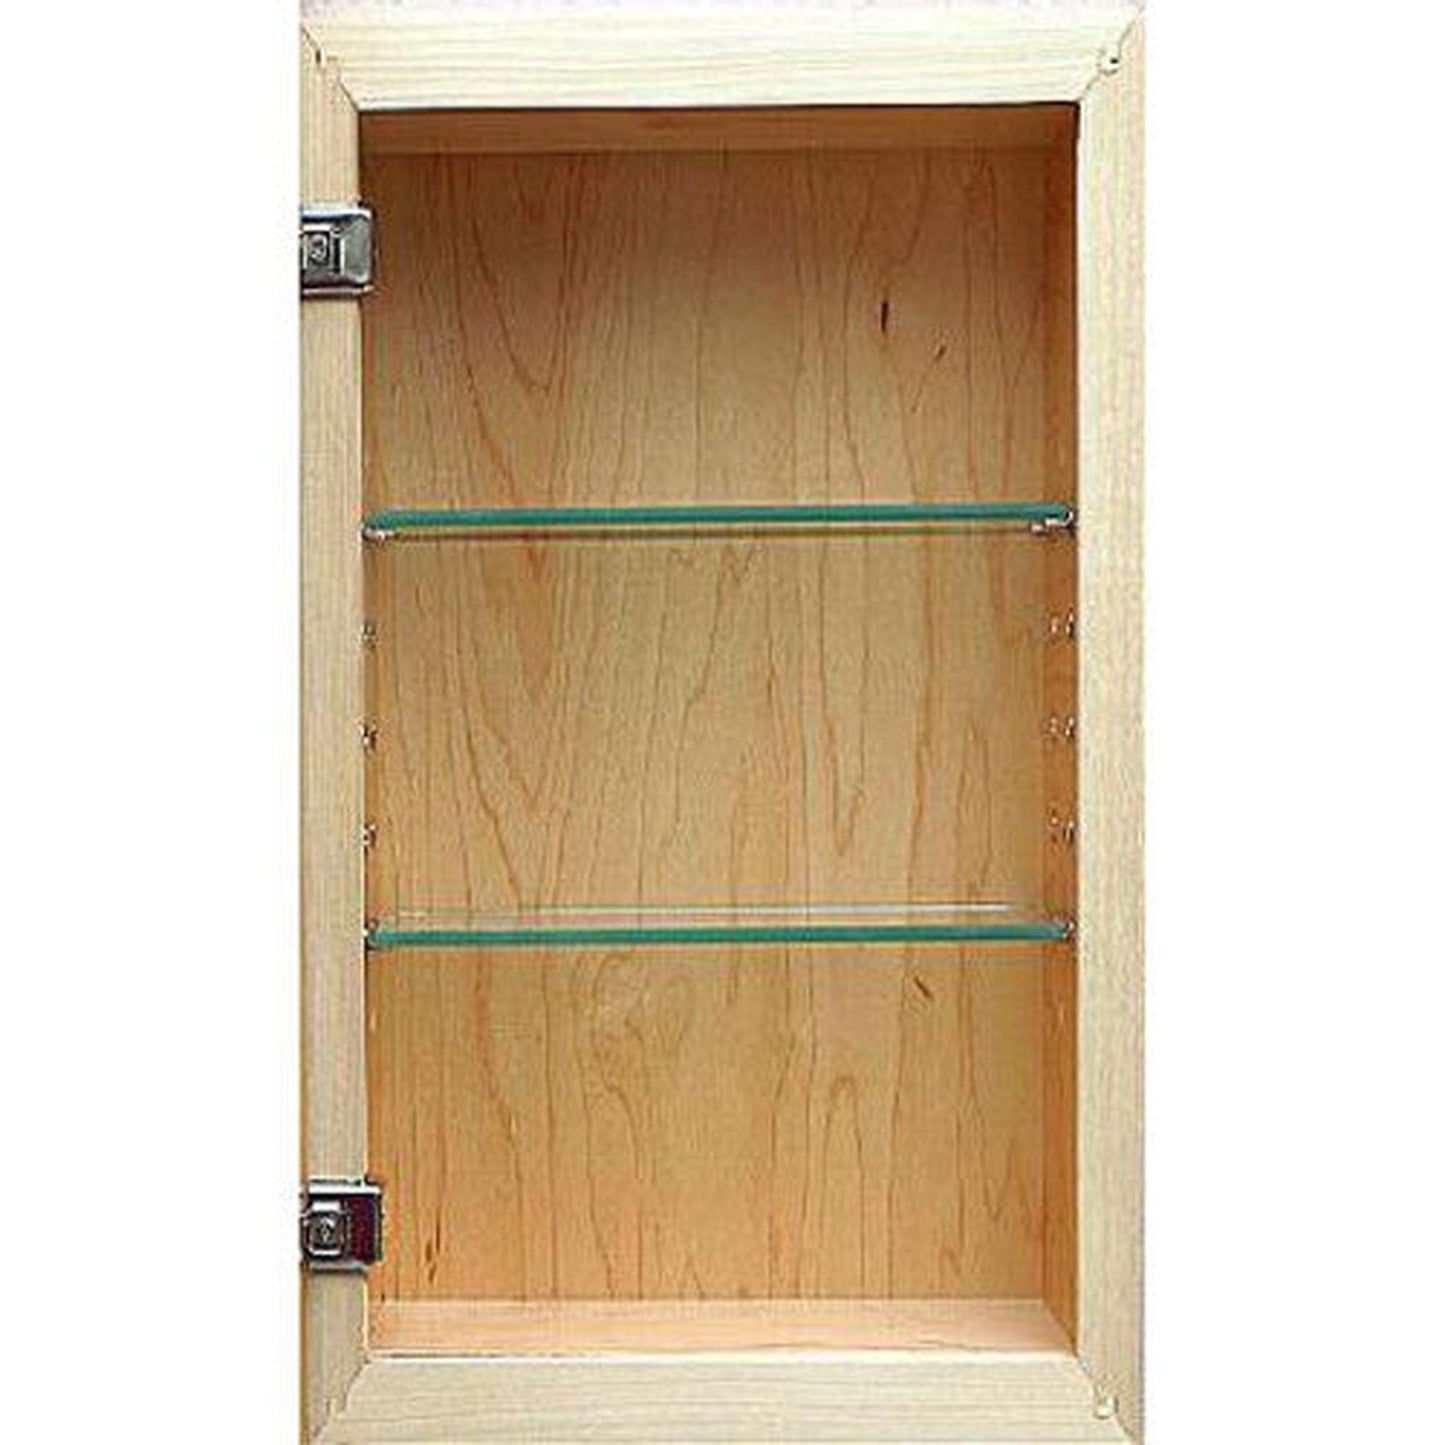 Fox Hollow Furnishings 14" x 24" Unfinished Shaker Style Natural Interior Standard 4" Depth Recessed Medicine Cabinet With Mirror